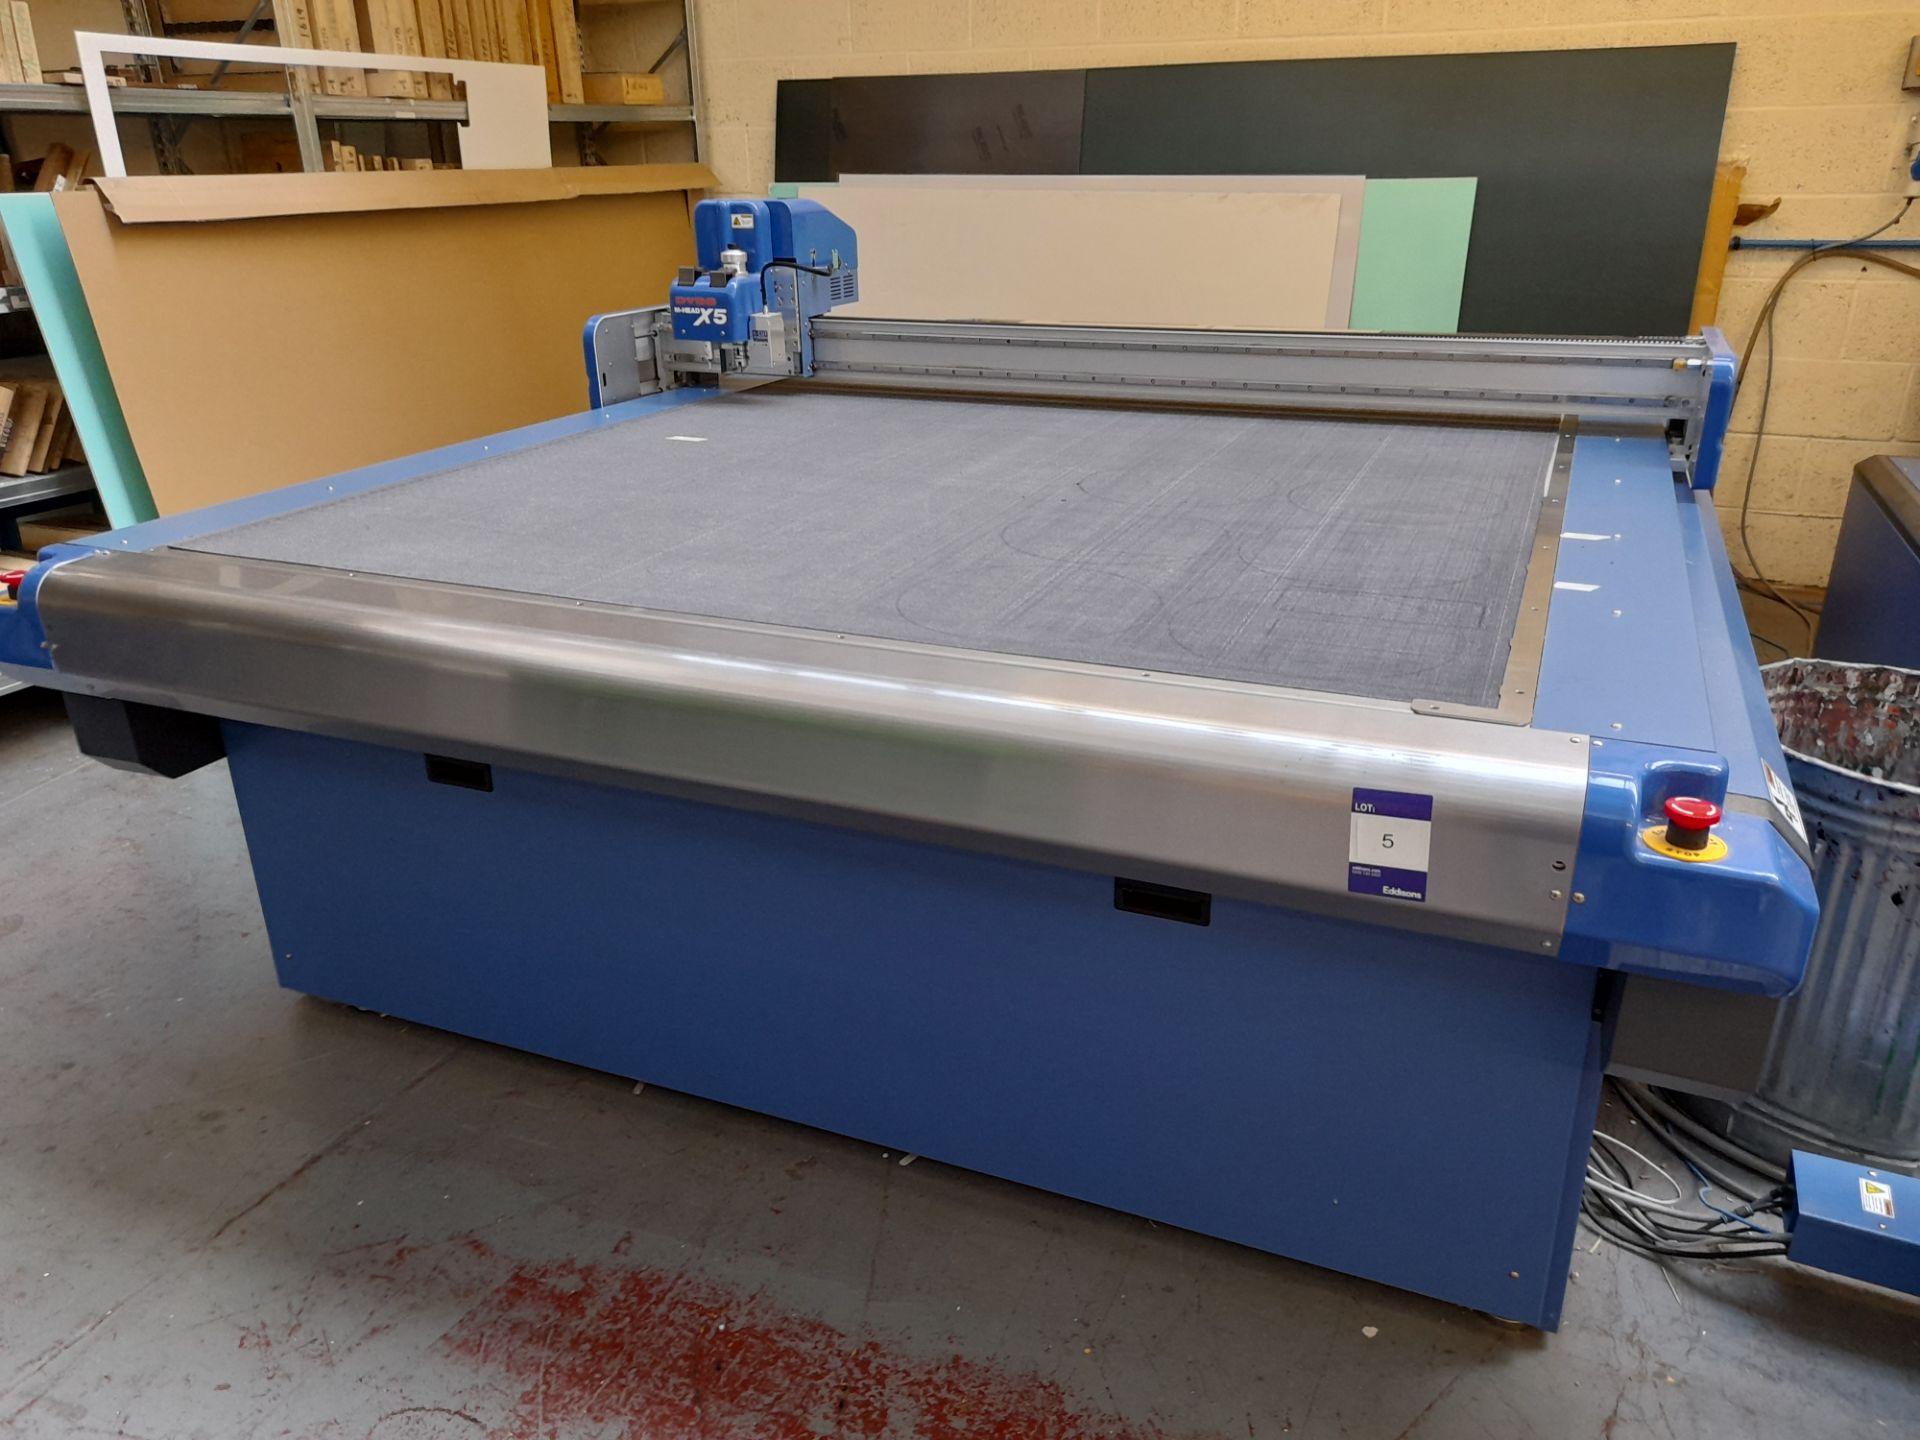 Dyss X5 Digital Die Cutter, serial number 1625TNKC160401, manufactured April 2016, with controls and - Image 8 of 11